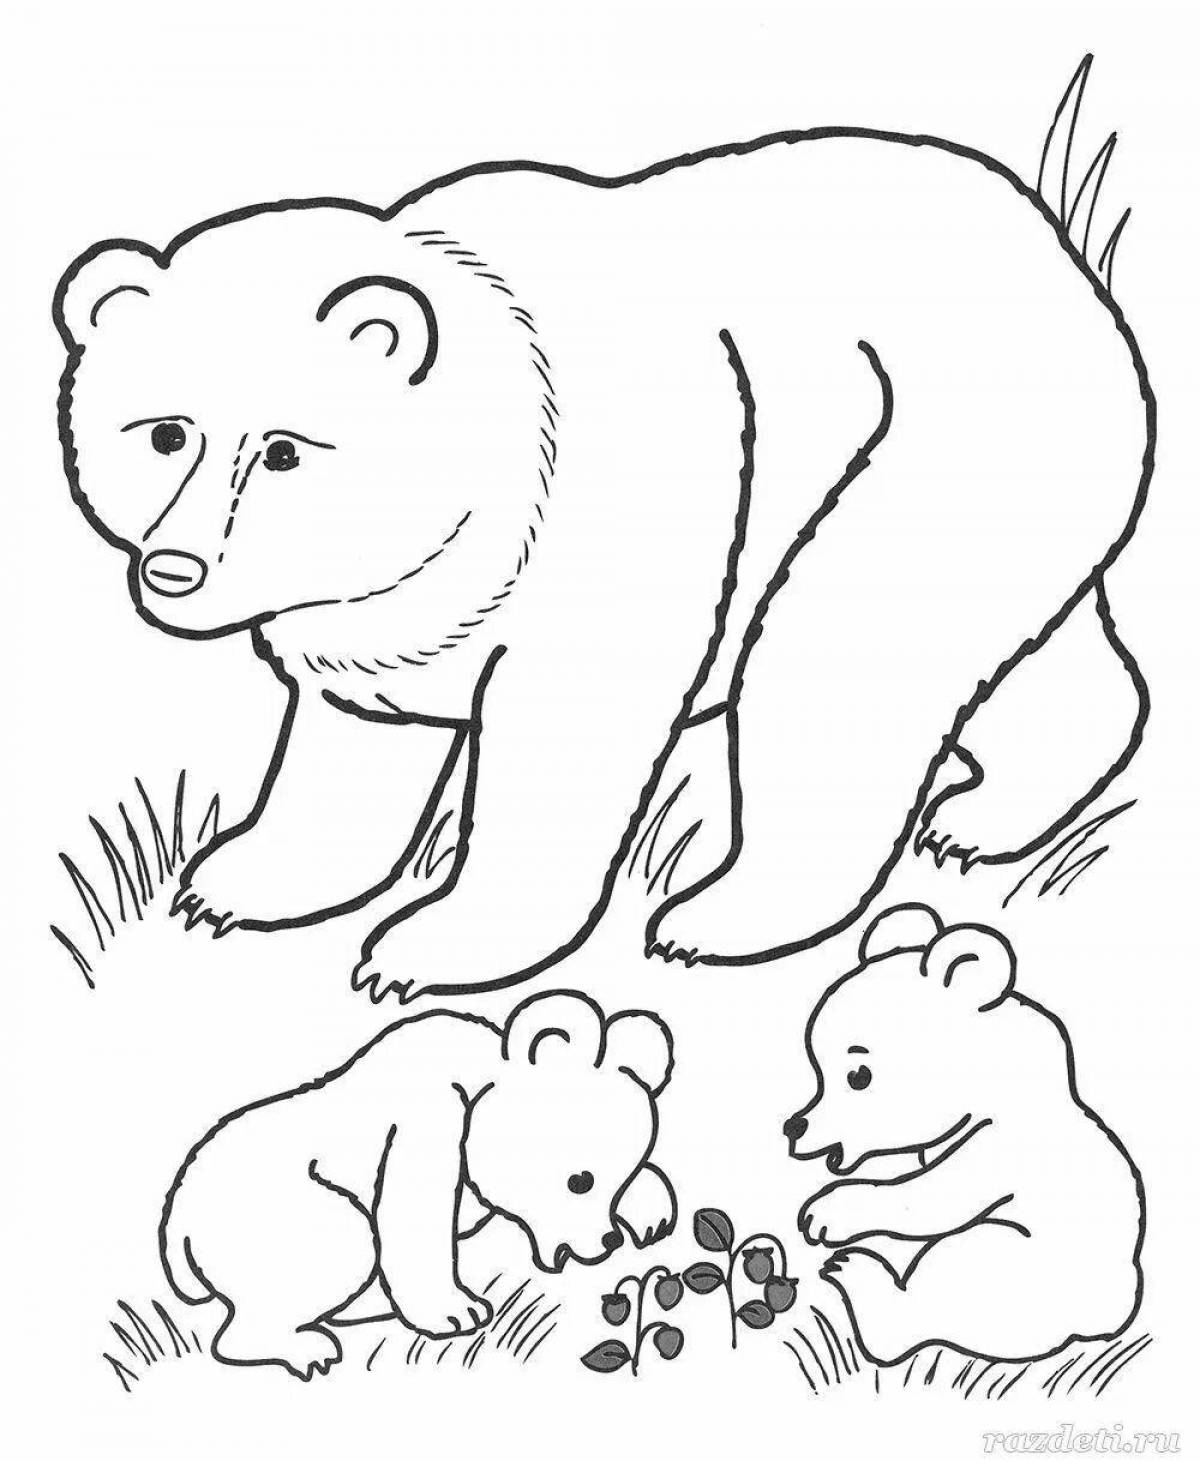 Coloring book nice bear and fox